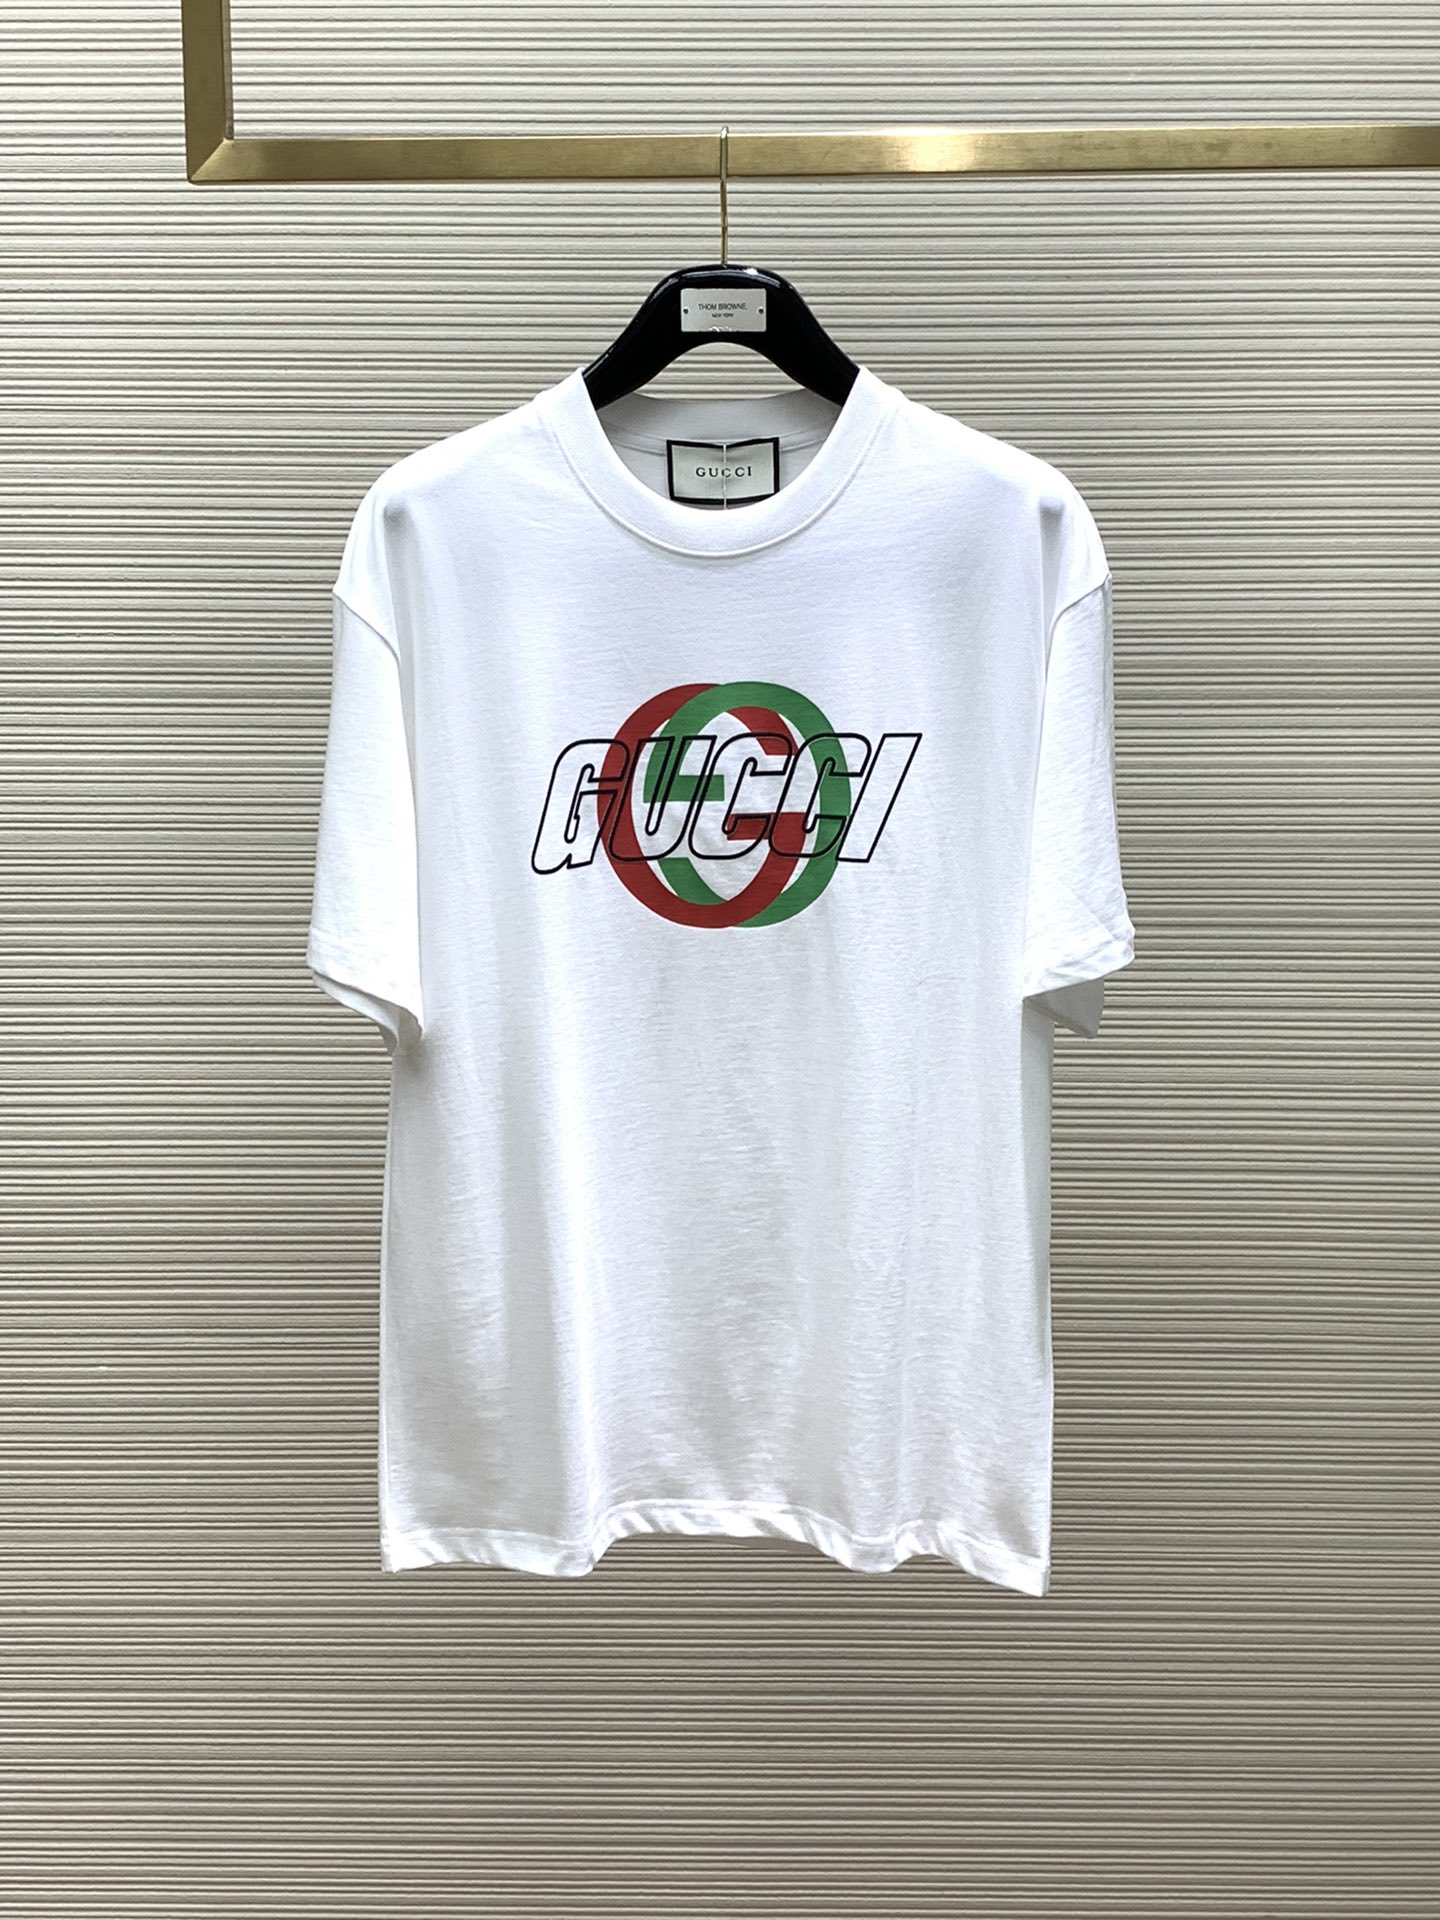 Gucci Sale
 Clothing T-Shirt Printing Summer Collection Fashion Short Sleeve